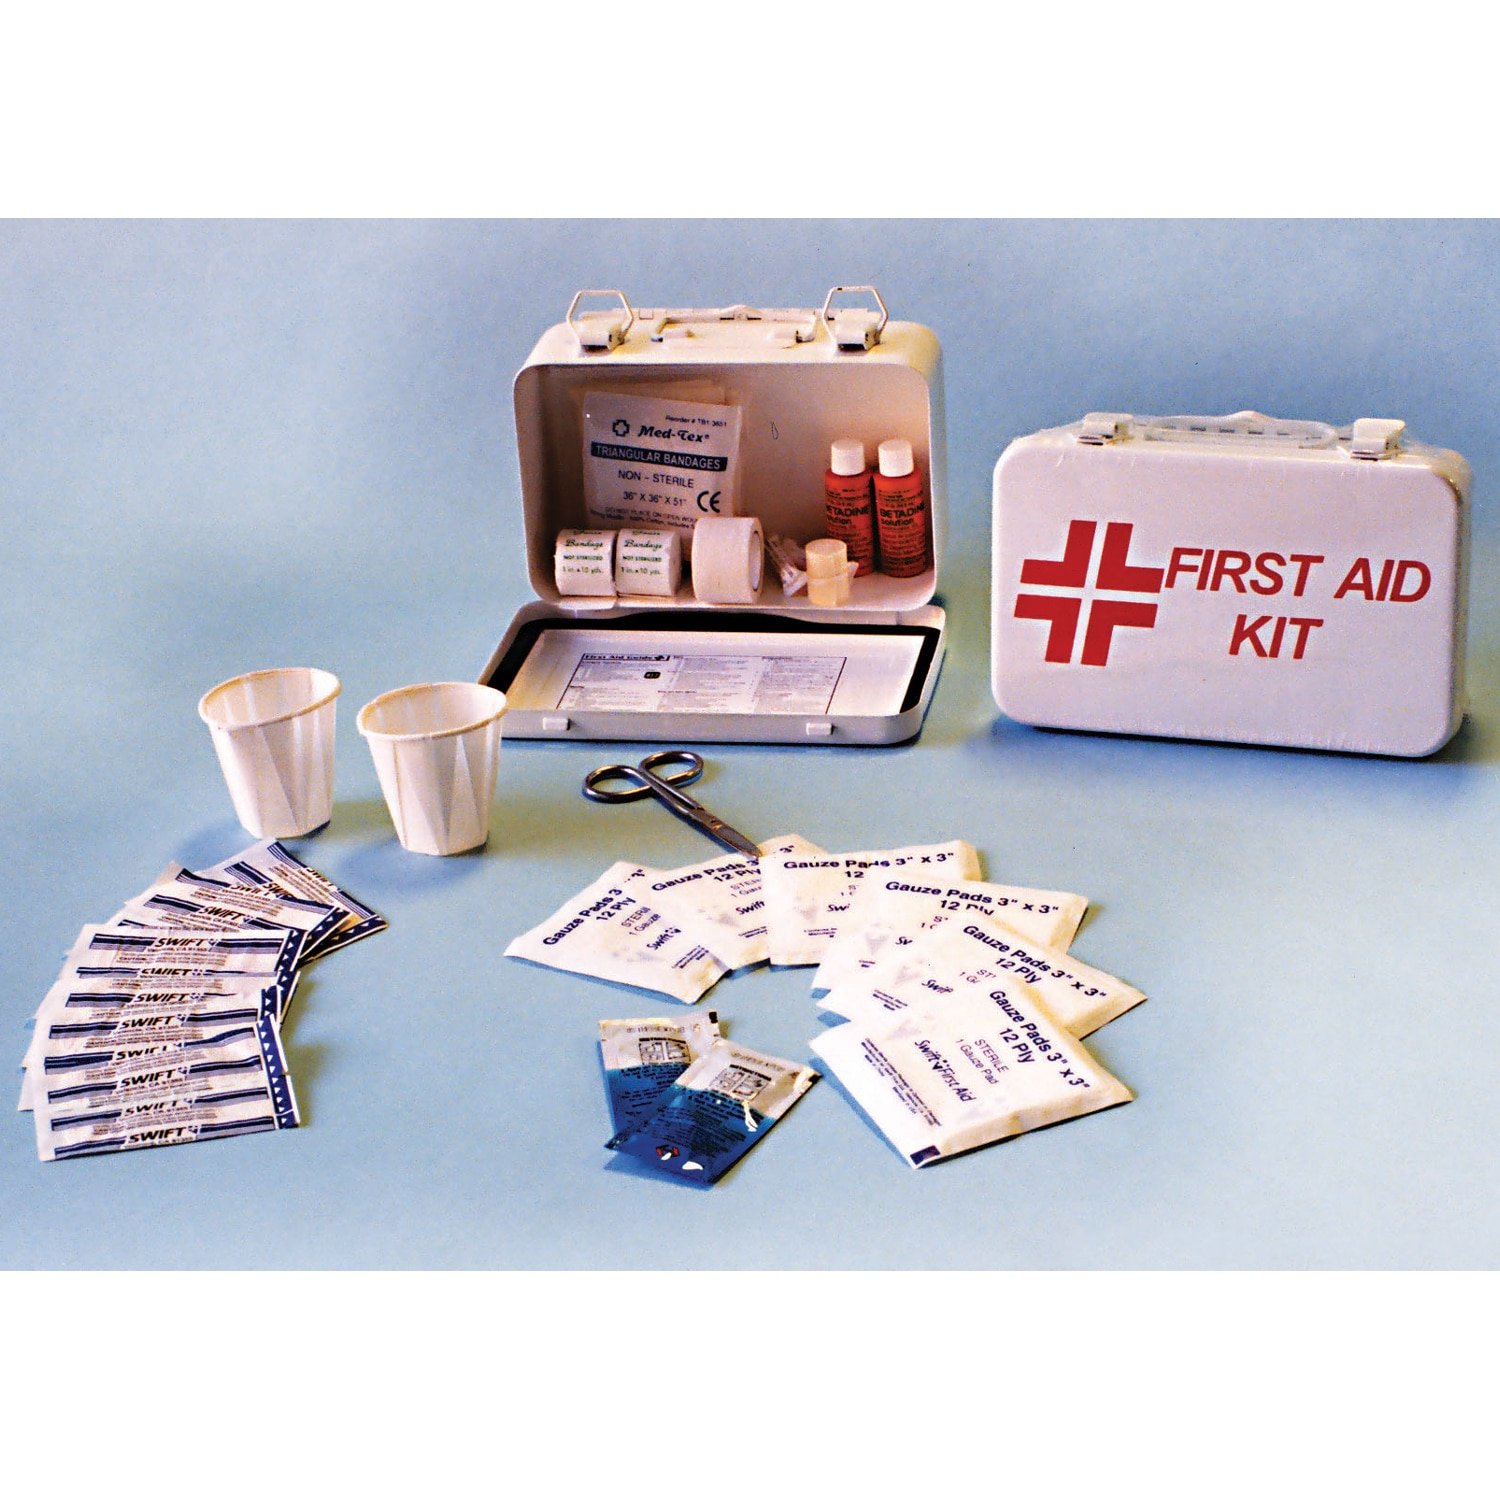 Kit, First Aid, Commercial Auto Use, 7.75"W x 2.5"D x 5"L